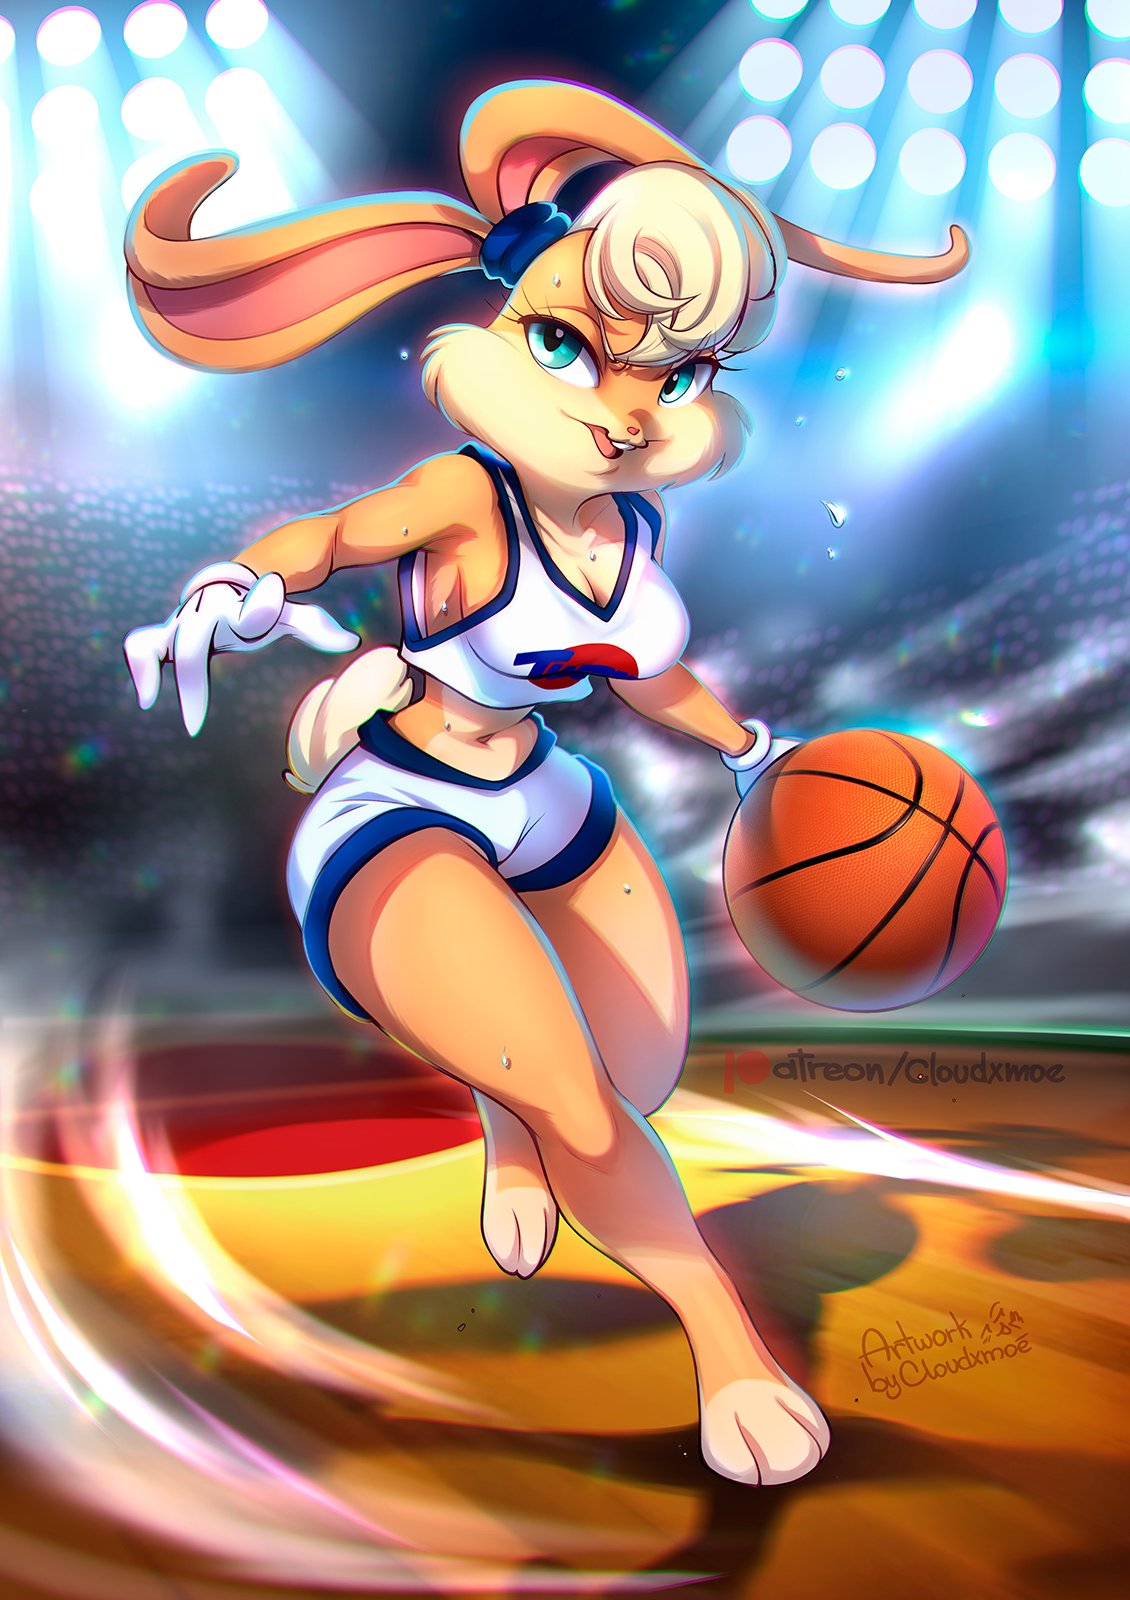 “I have nothing against the new design of Lola Bunny, nor do I intend to &a...